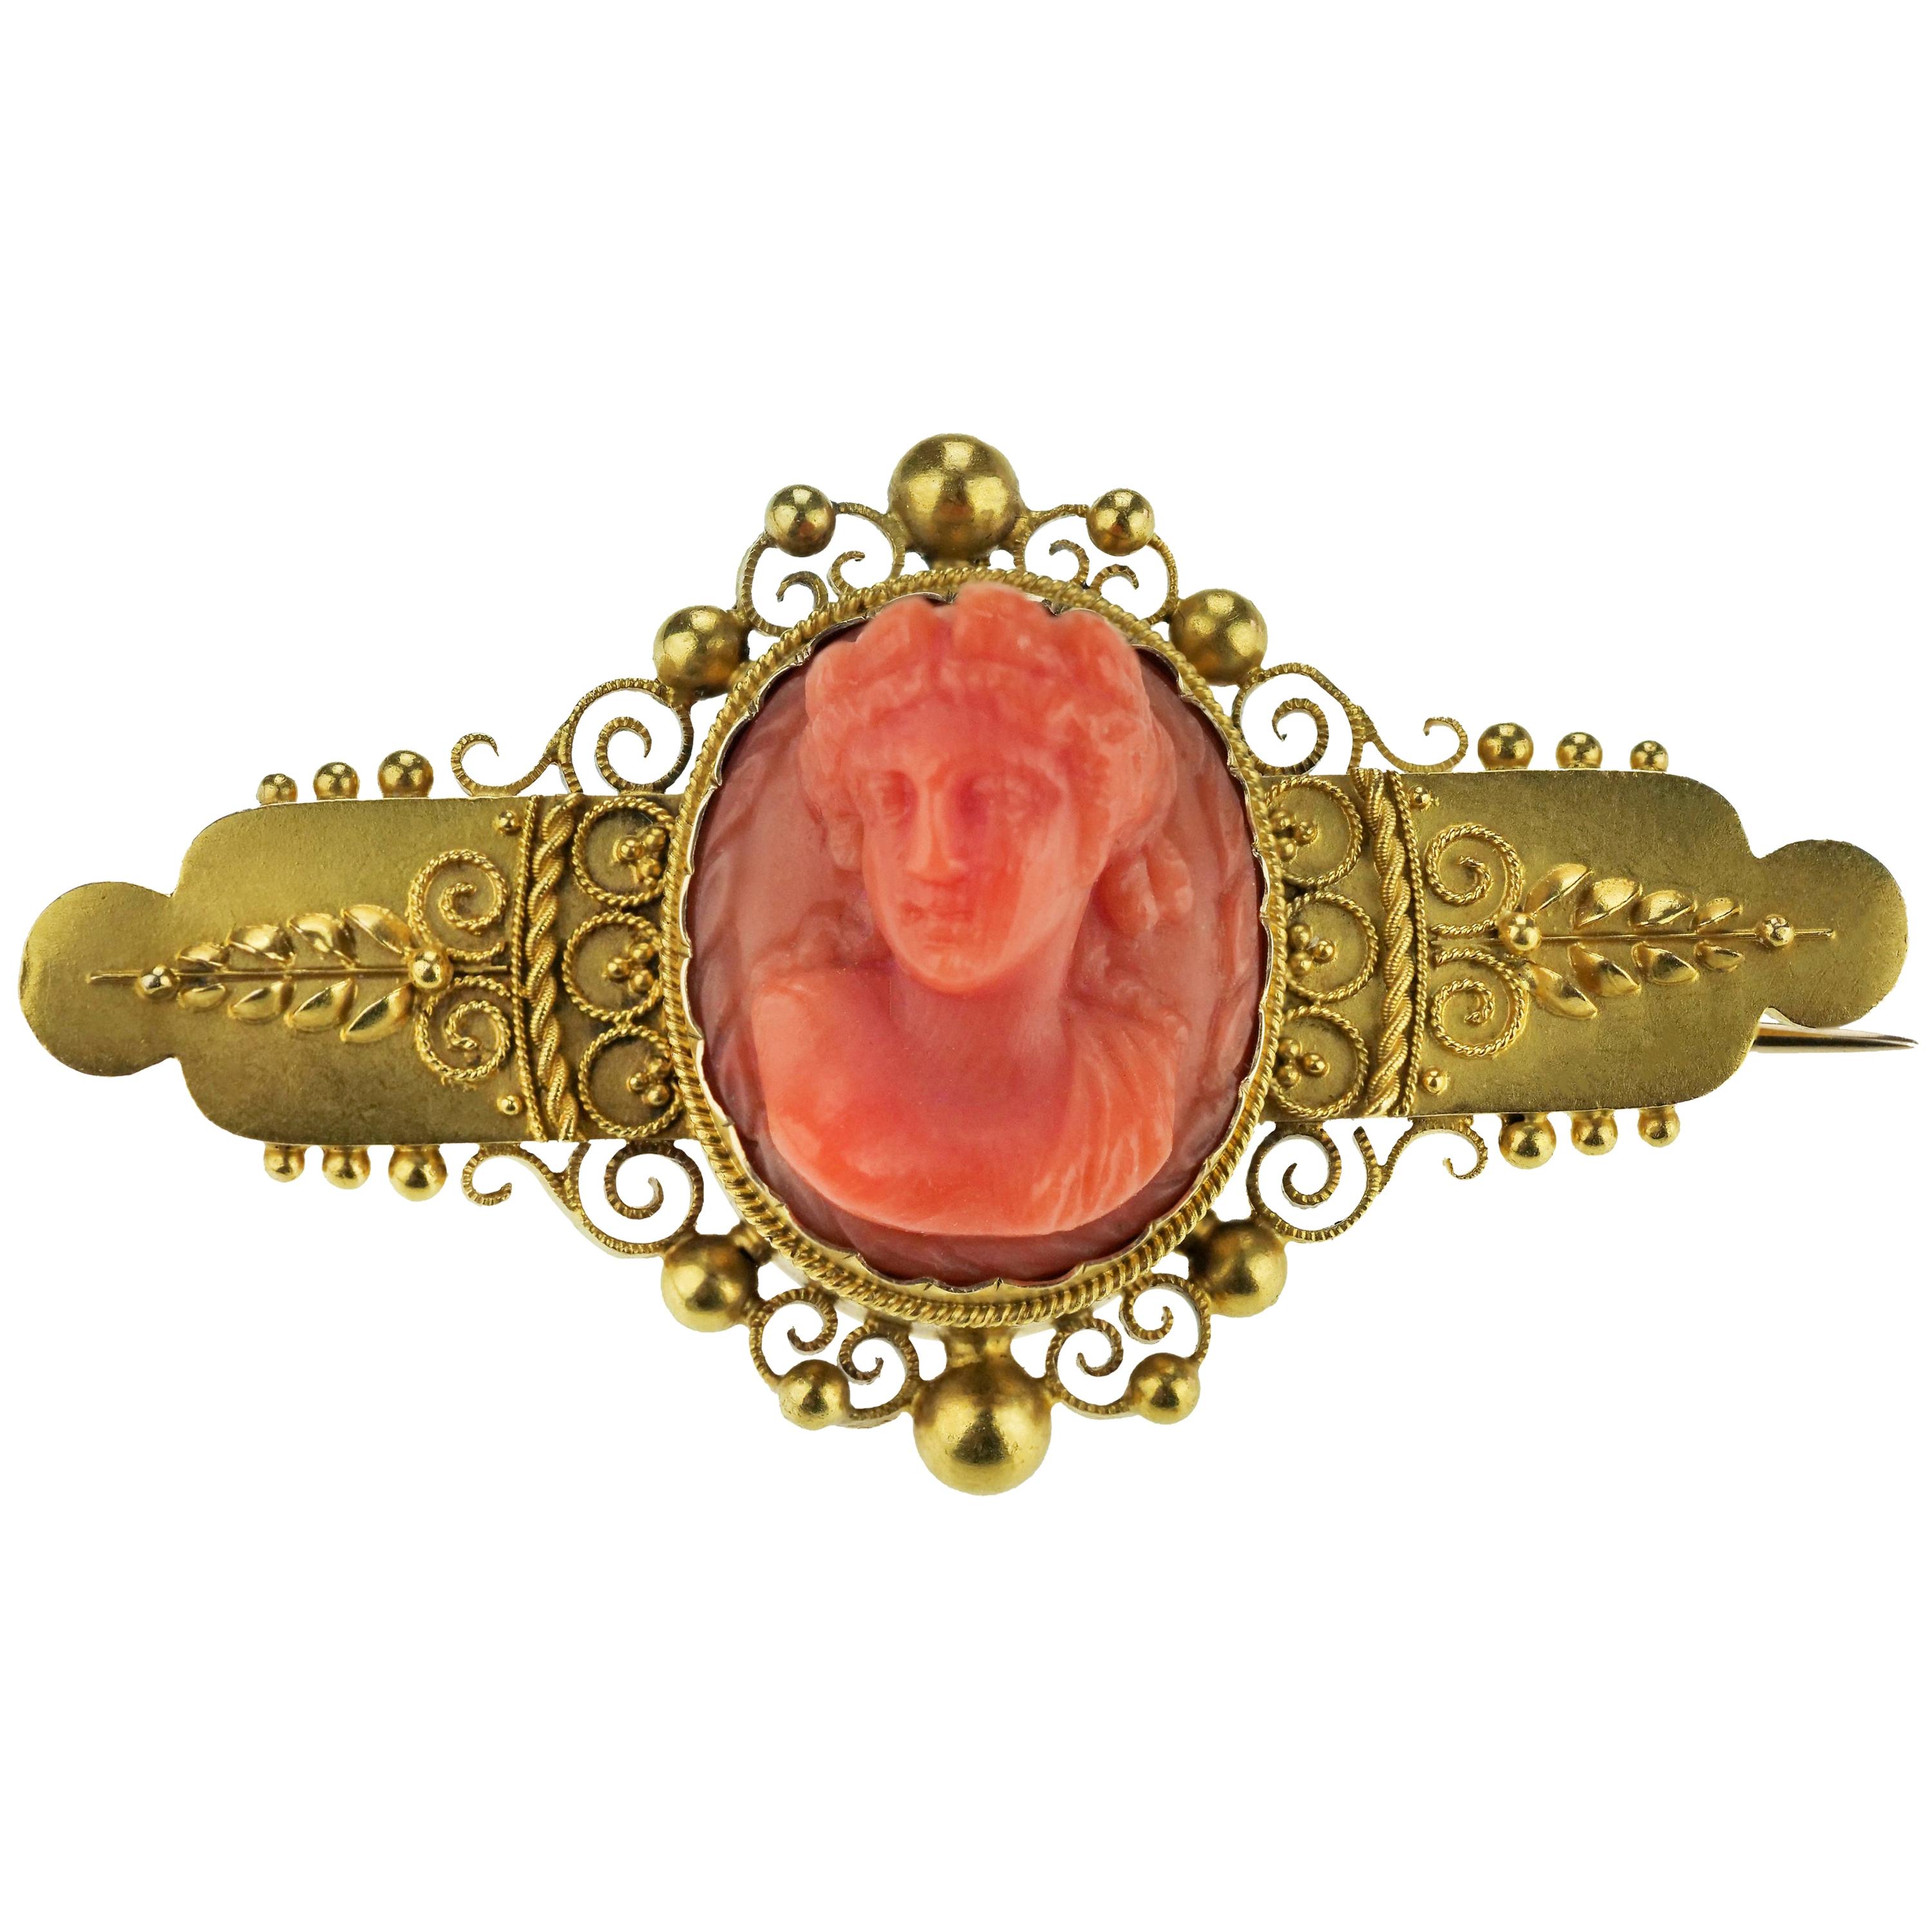 Details about   Vintage Hematite Cameo Brooch Pin Gold Tone Scrolled Setting Victorian Revival 